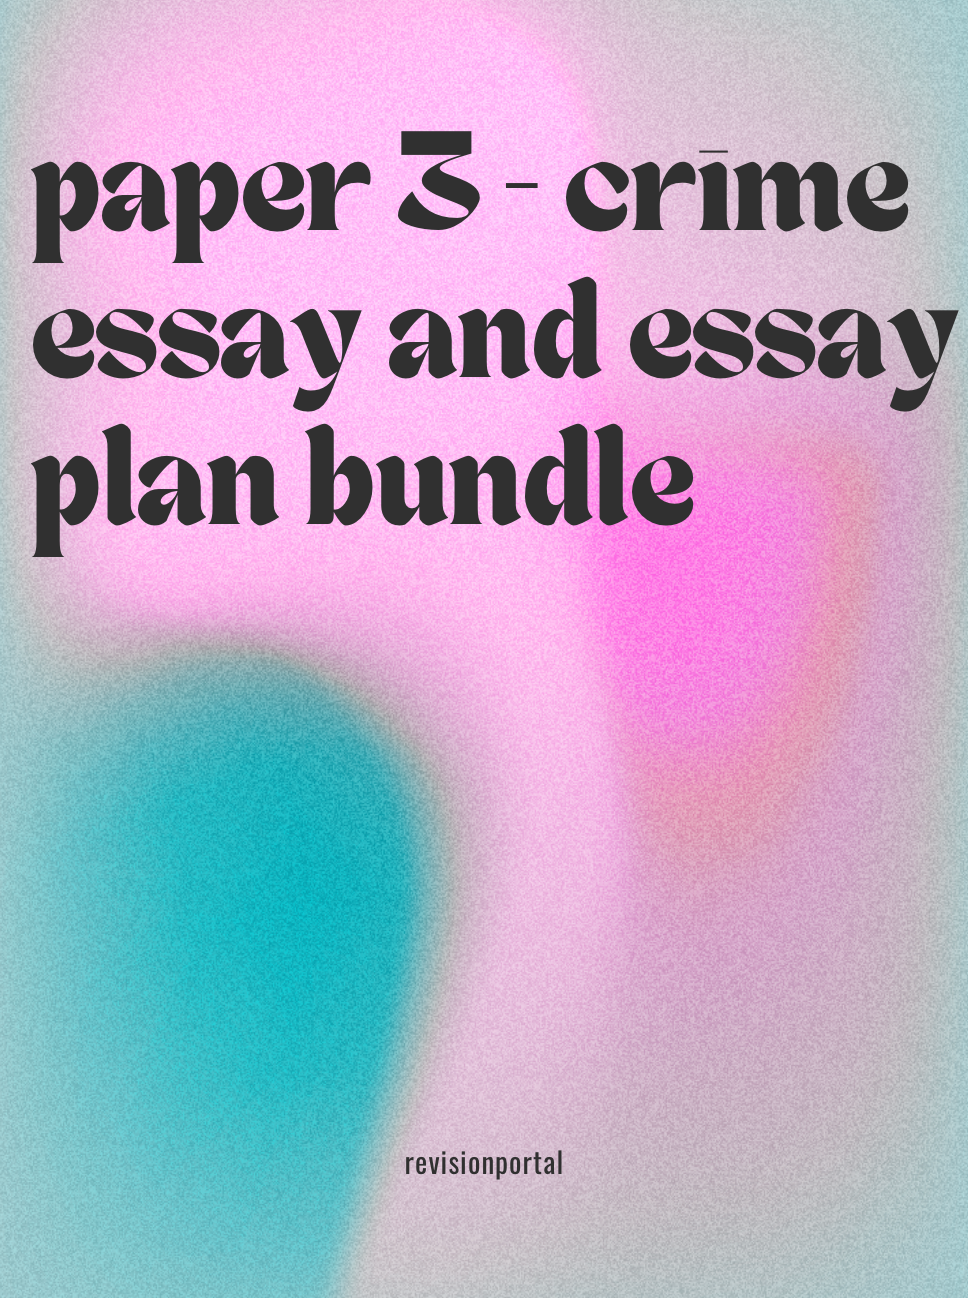 sociology paper 3 essays and essay plans